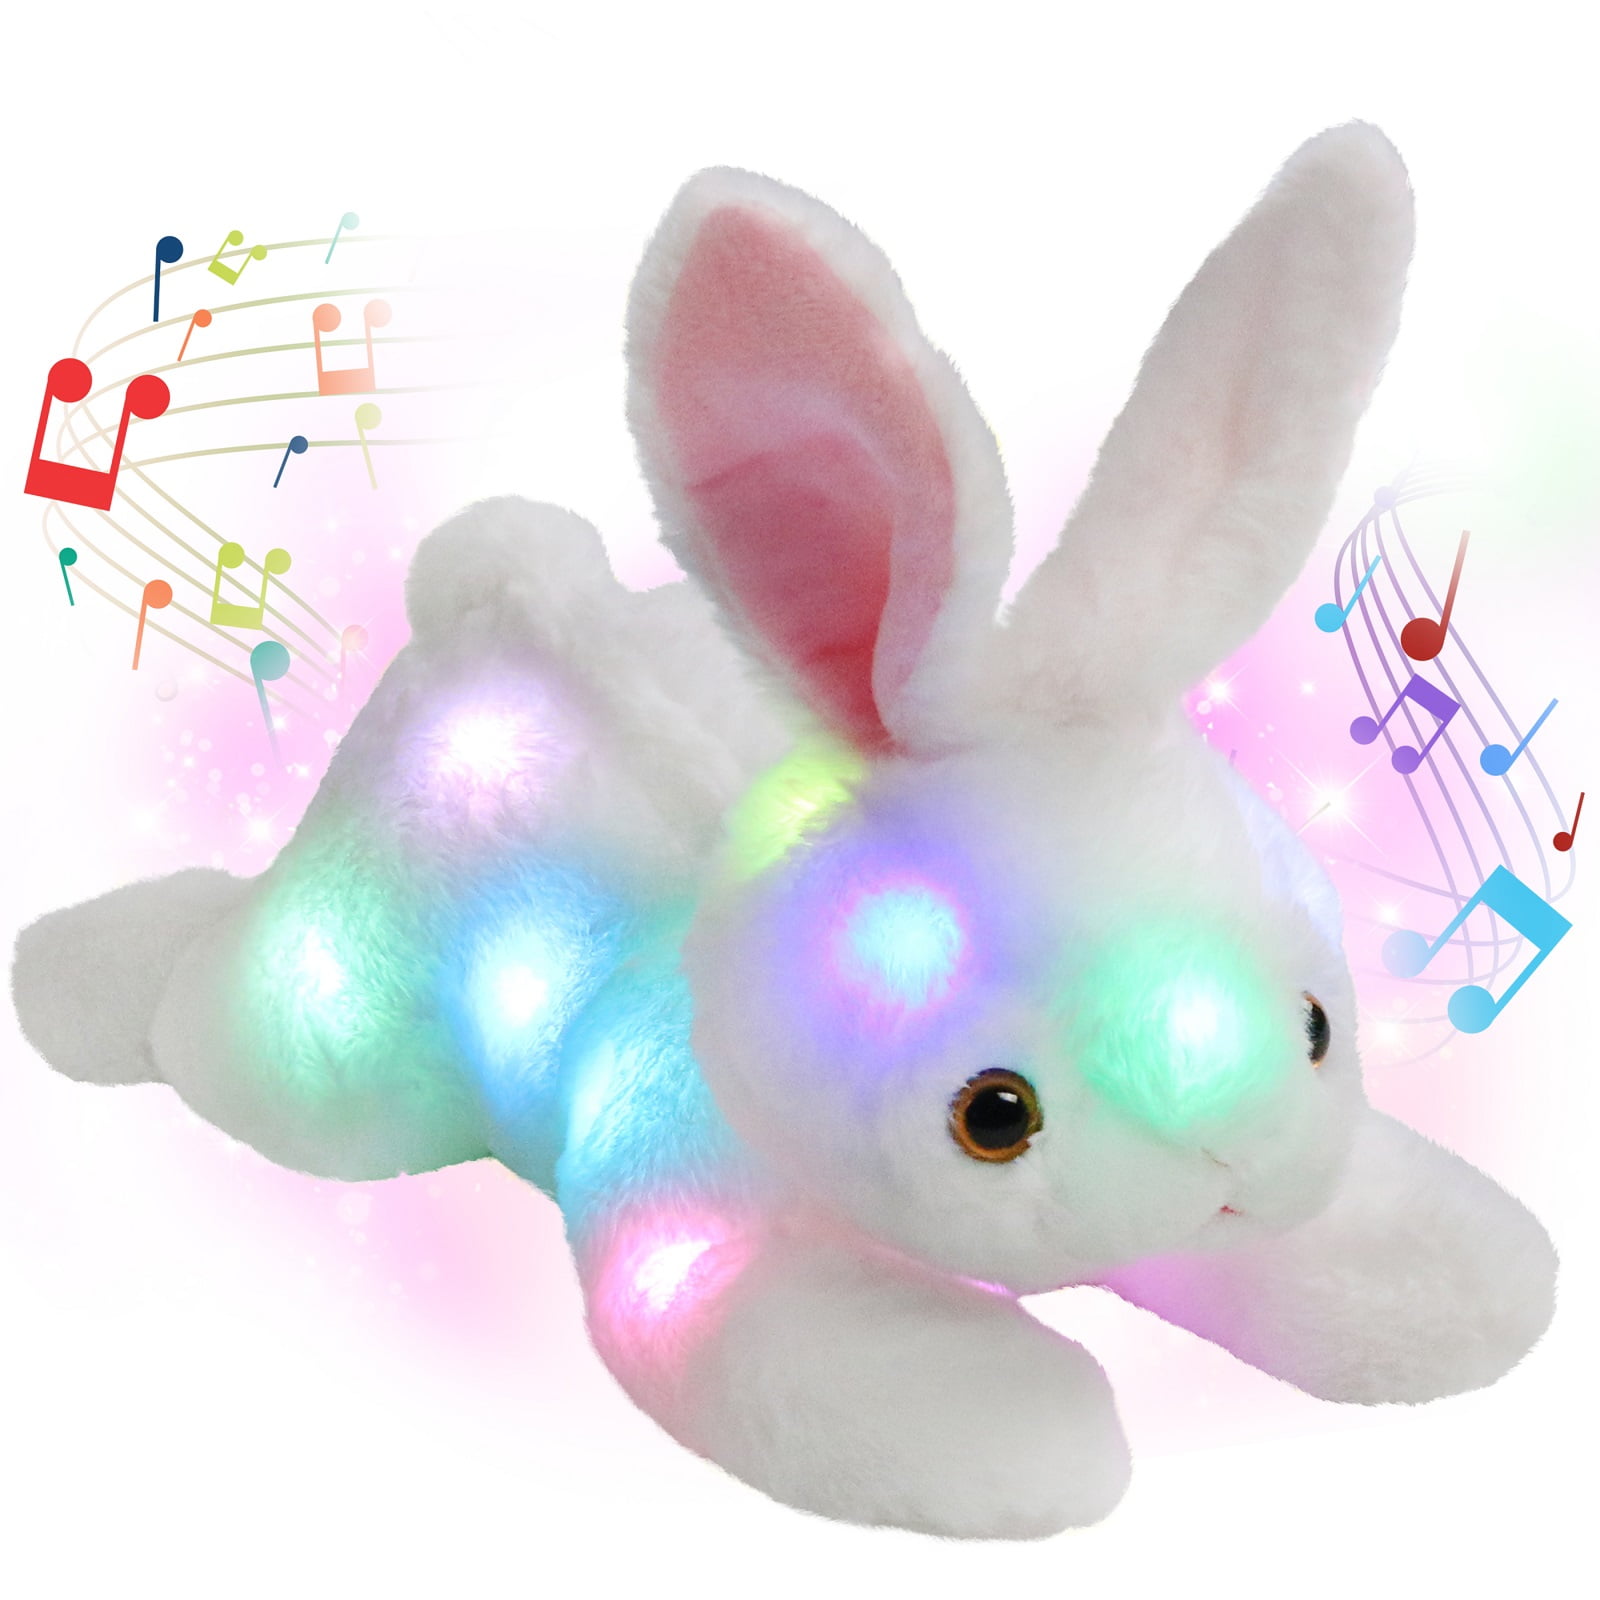 SOFT FUR CUDDLE TOY WITH LED NIGHT LIGHTS SOFT PLAY SENSORY ADHT RELAX 